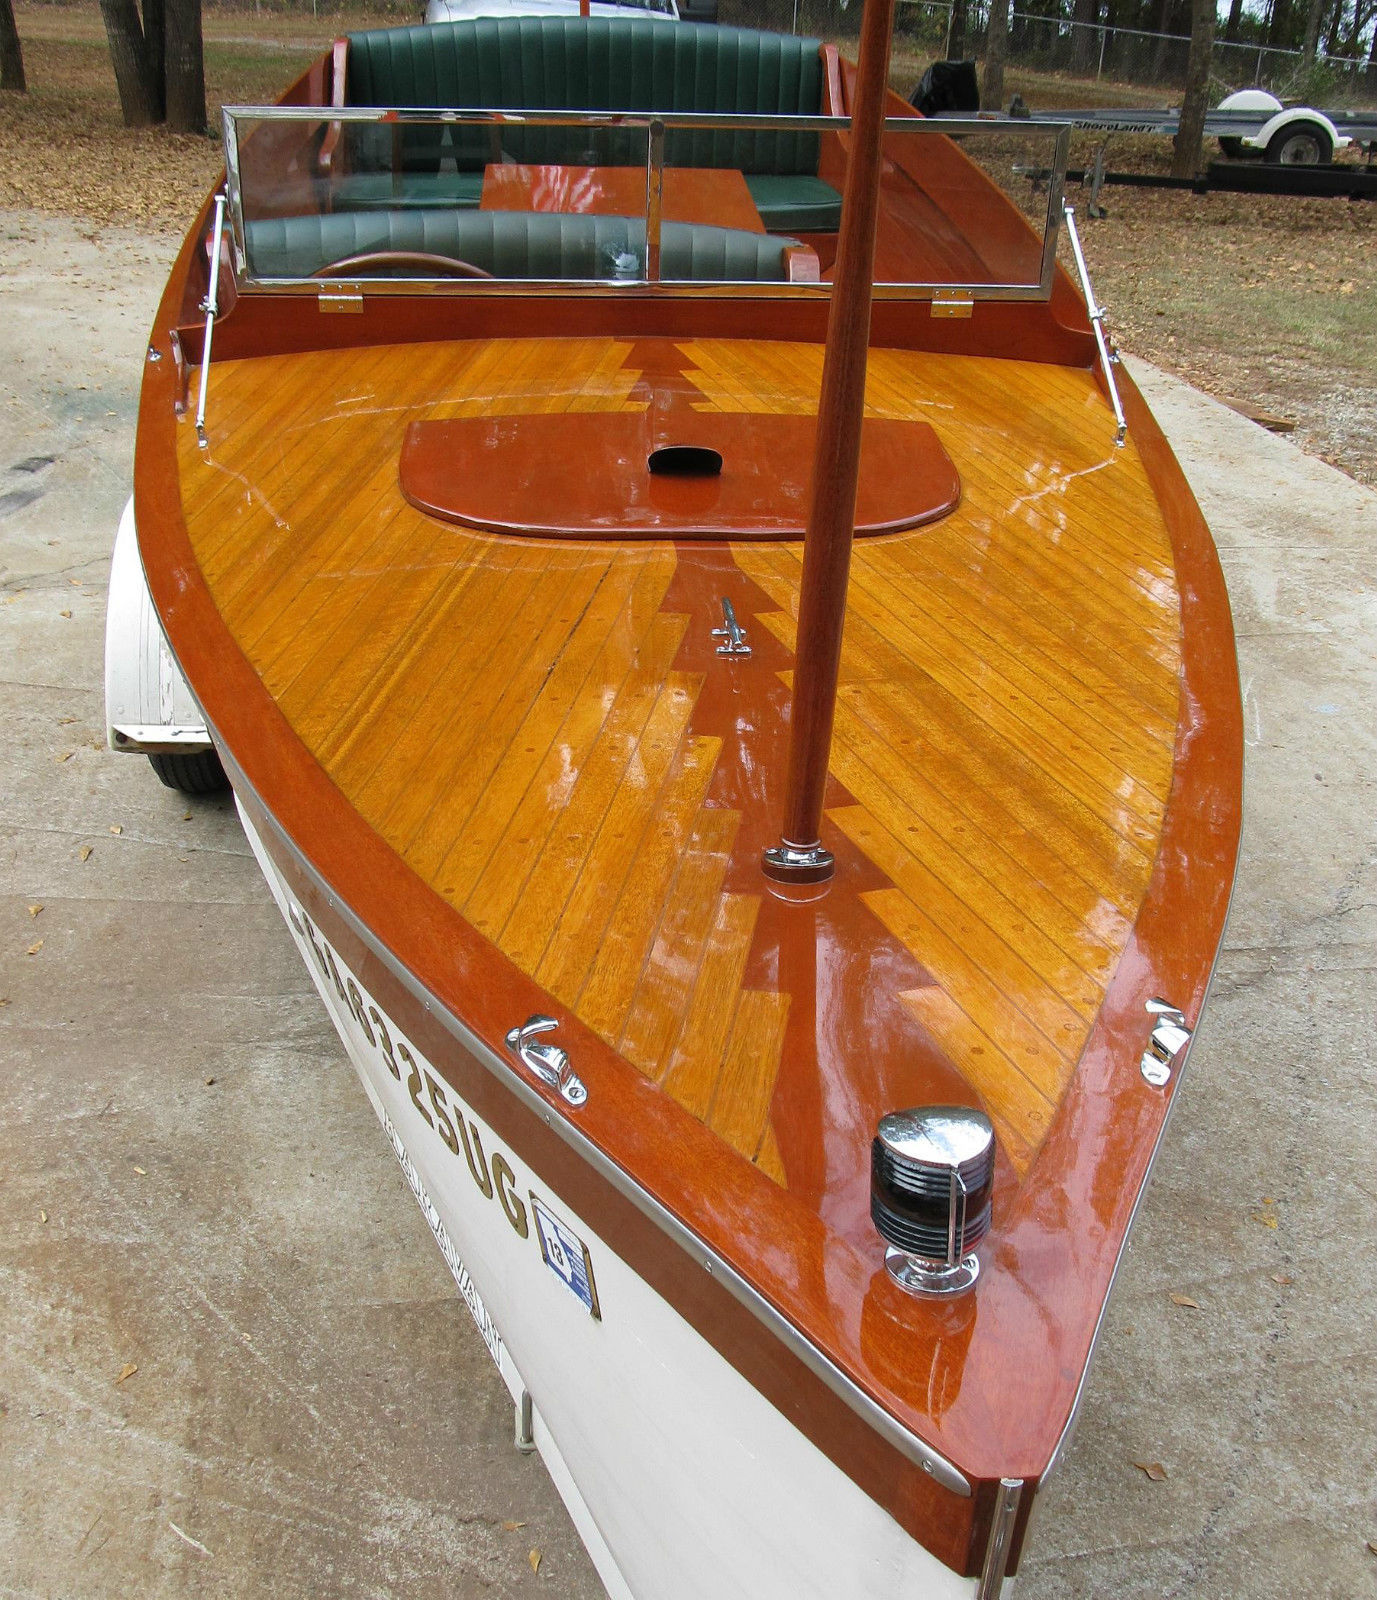 custom built launch 2007 for sale for ,000 - boats-from